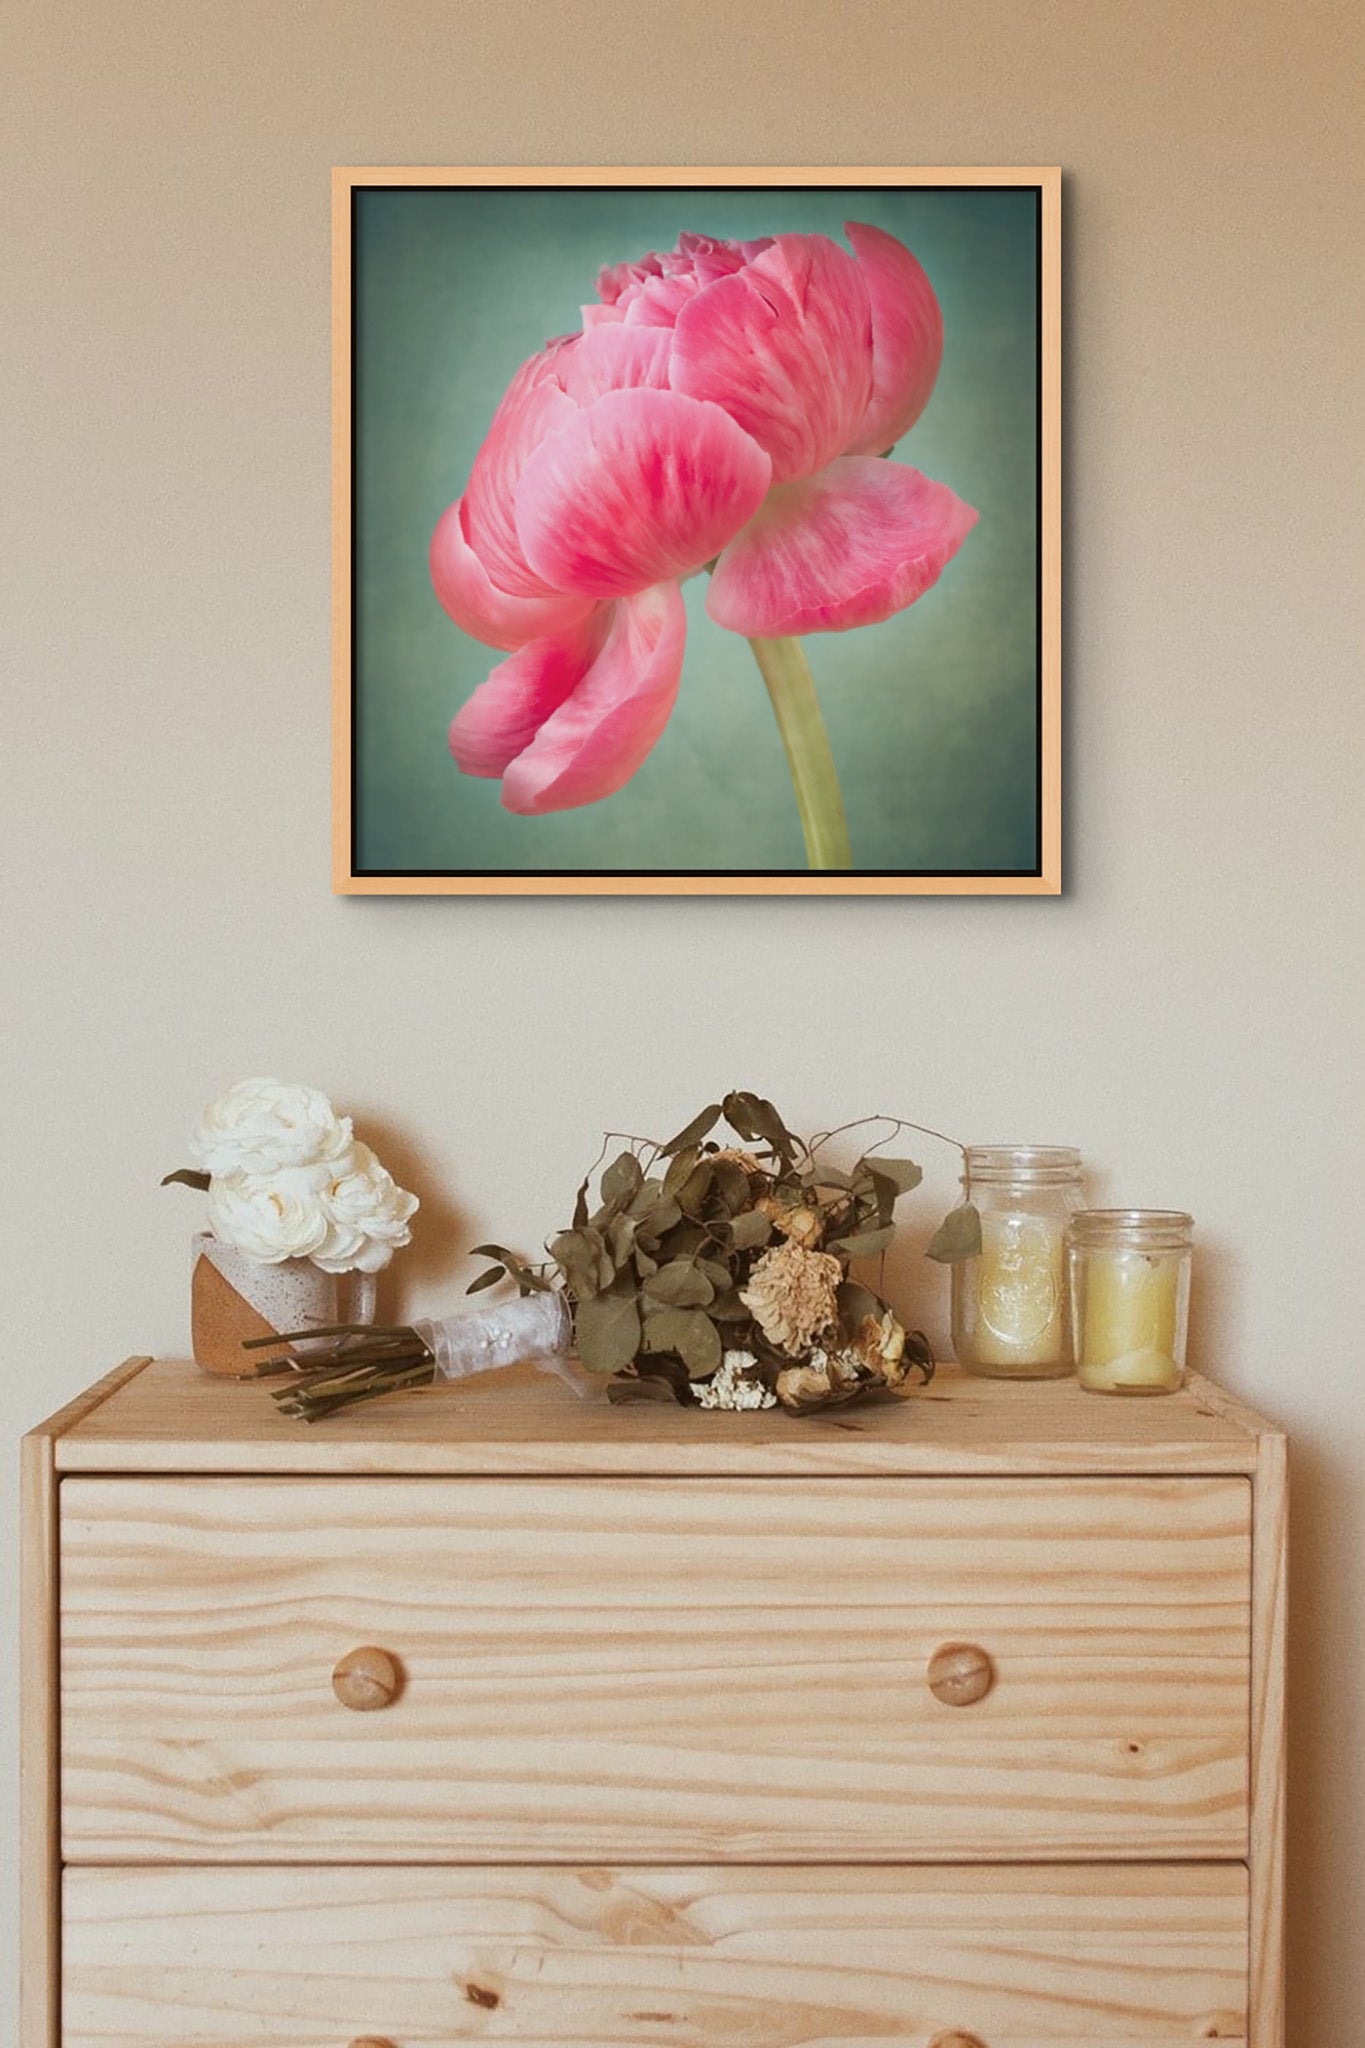 Picture hanging on a wall. Under the picture,  there is a chest of drawers. On top of the chest of drawers are various items.The picture is a metal print photograph of a pink peony flower on a greenish background by photographer Cameron Dreaux. 